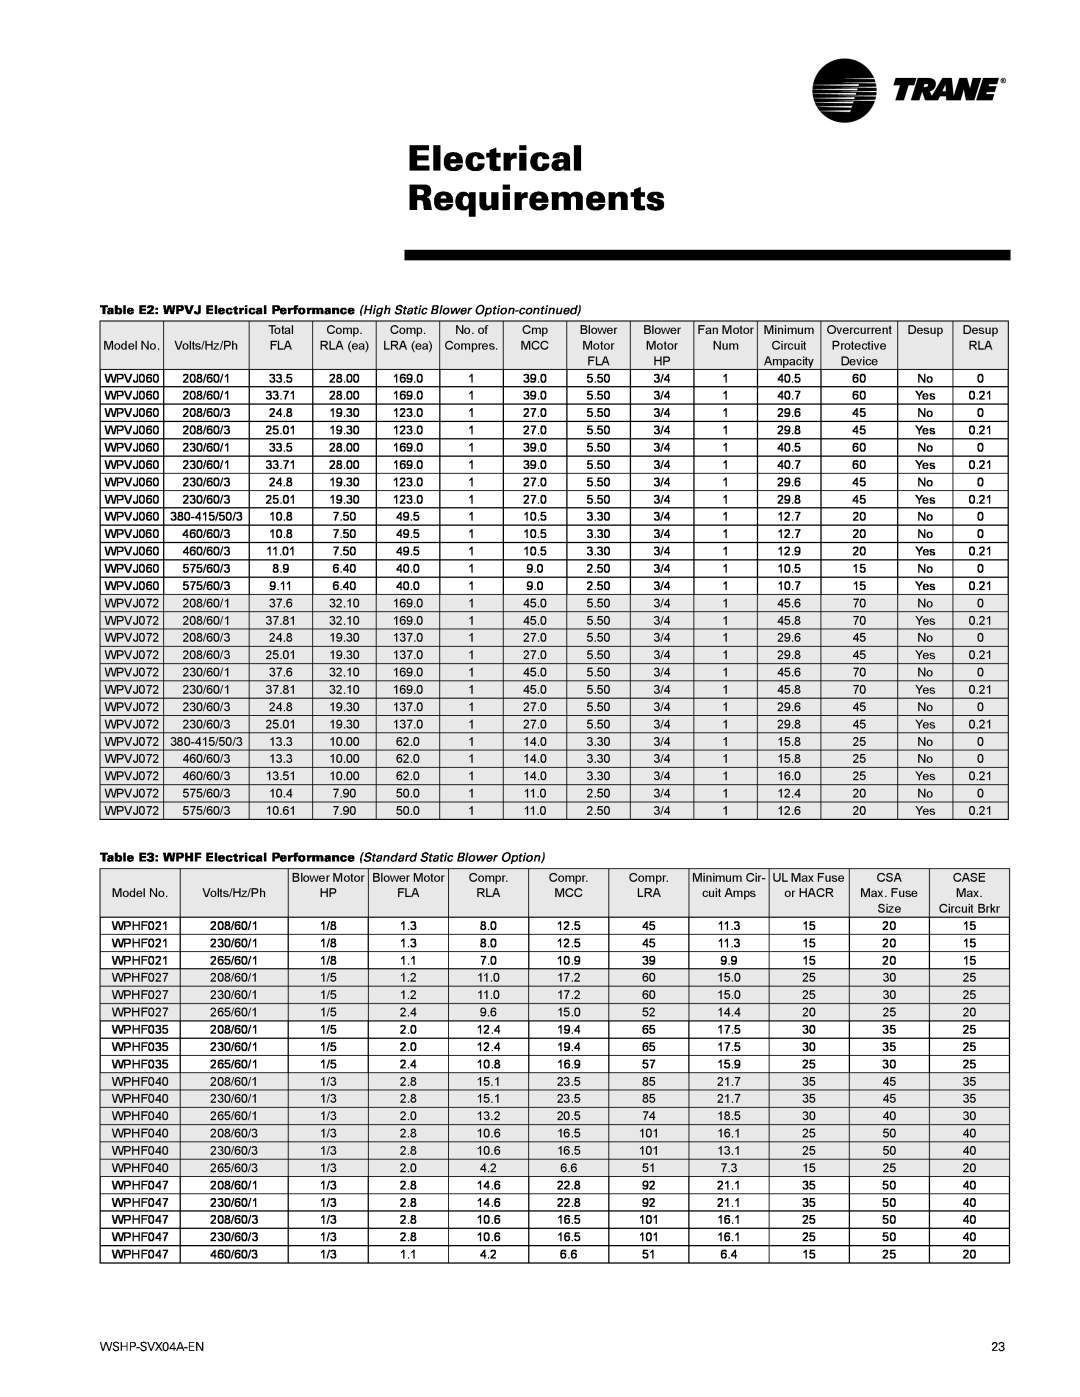 Trane WPVJ, WPHF manual Electrical Requirements, Total 